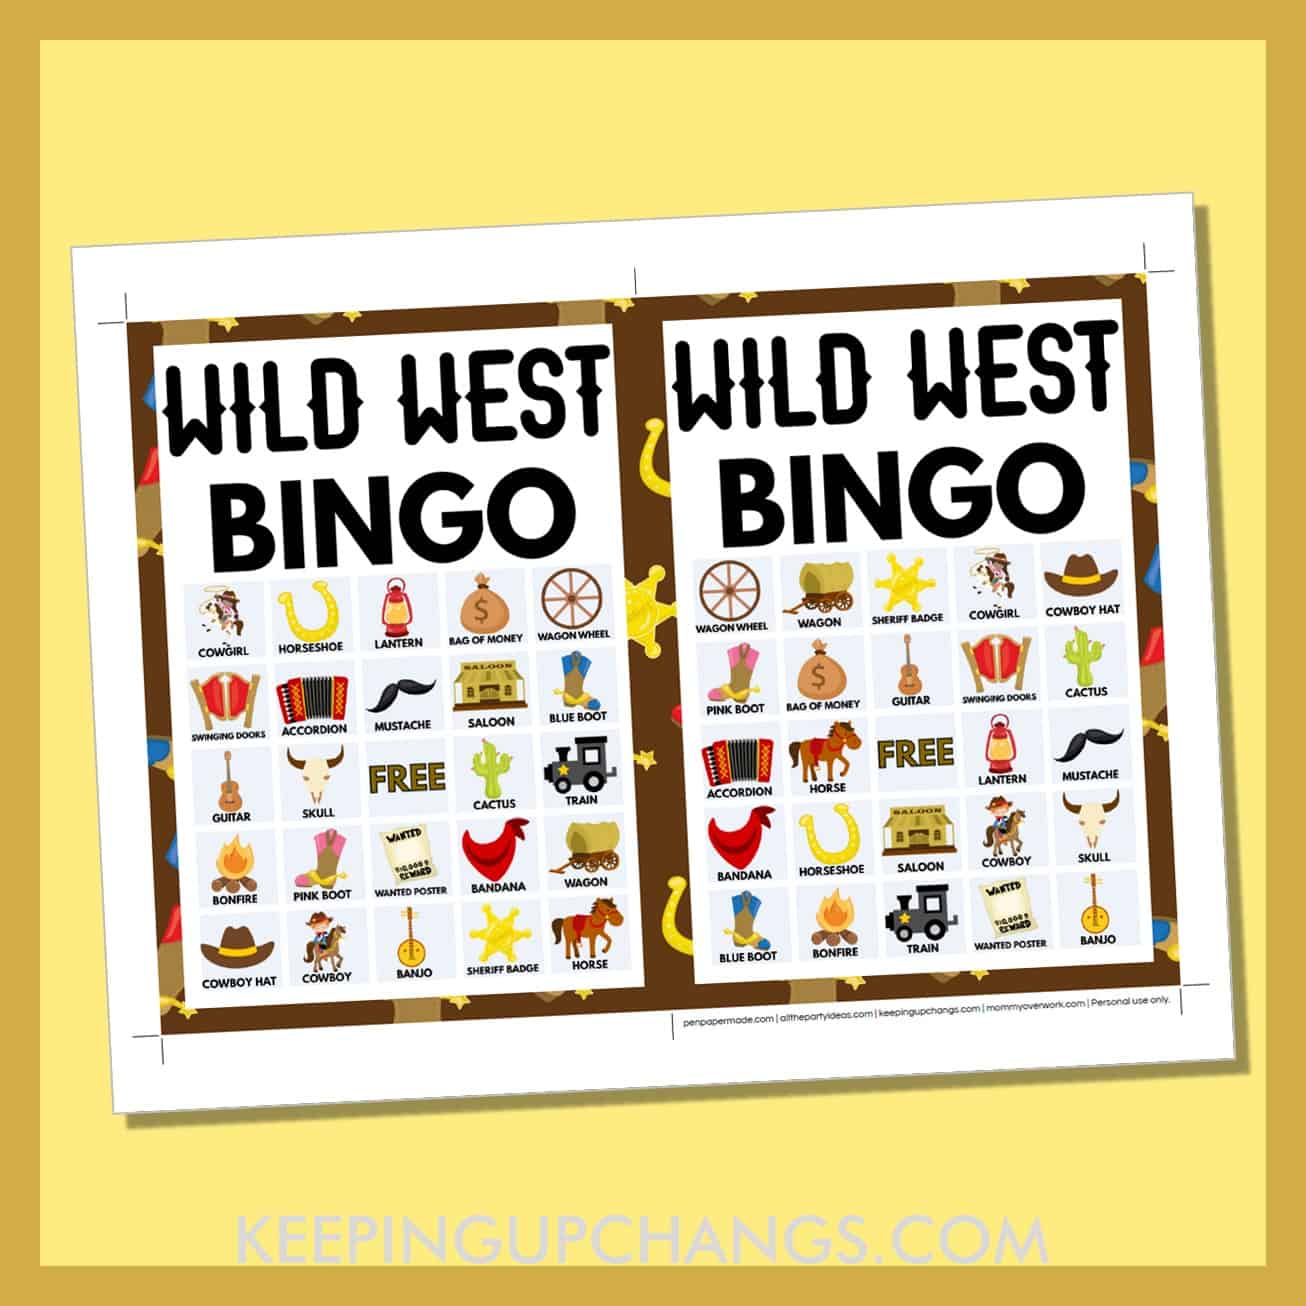 free wild west bingo card 5x5 5x7 game boards with images and text words.